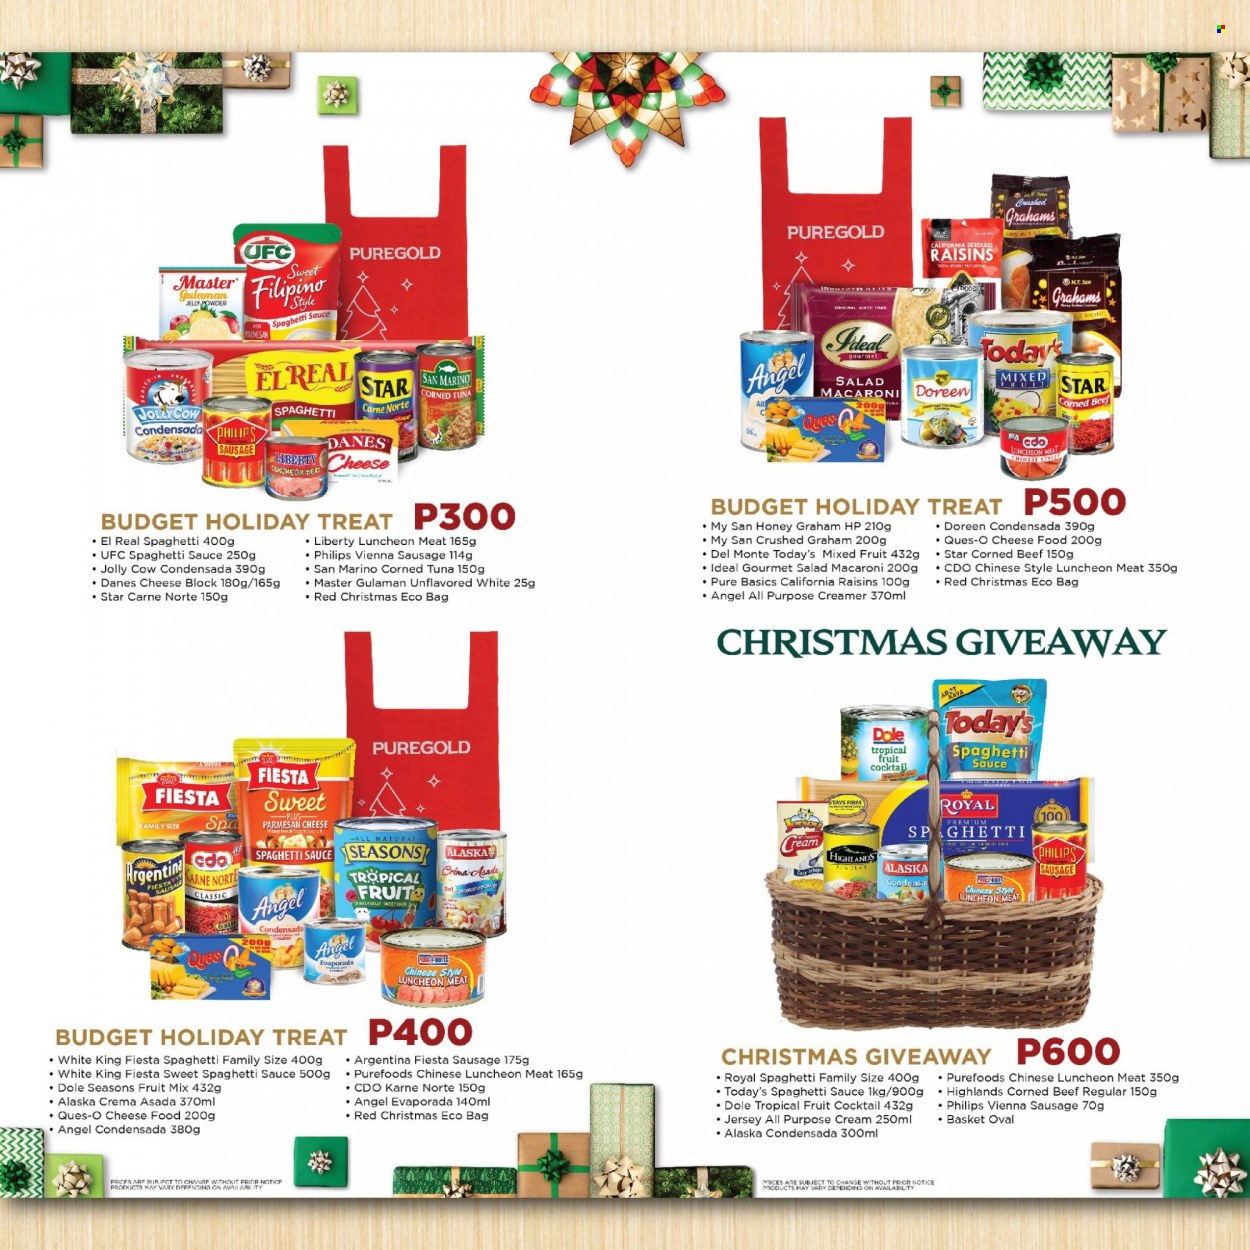 thumbnail - Puregold offer  - Sales products - tuna, spaghetti, macaroni, sauce, spaghetti sauce, sausage, vienna sausage, lunch meat, parmesan, cheese, fruit mix, jelly, semolina, corned beef, Dole, Del Monte, honey, raisins, dried fruit, bag, Philips, mixer. Page 3.